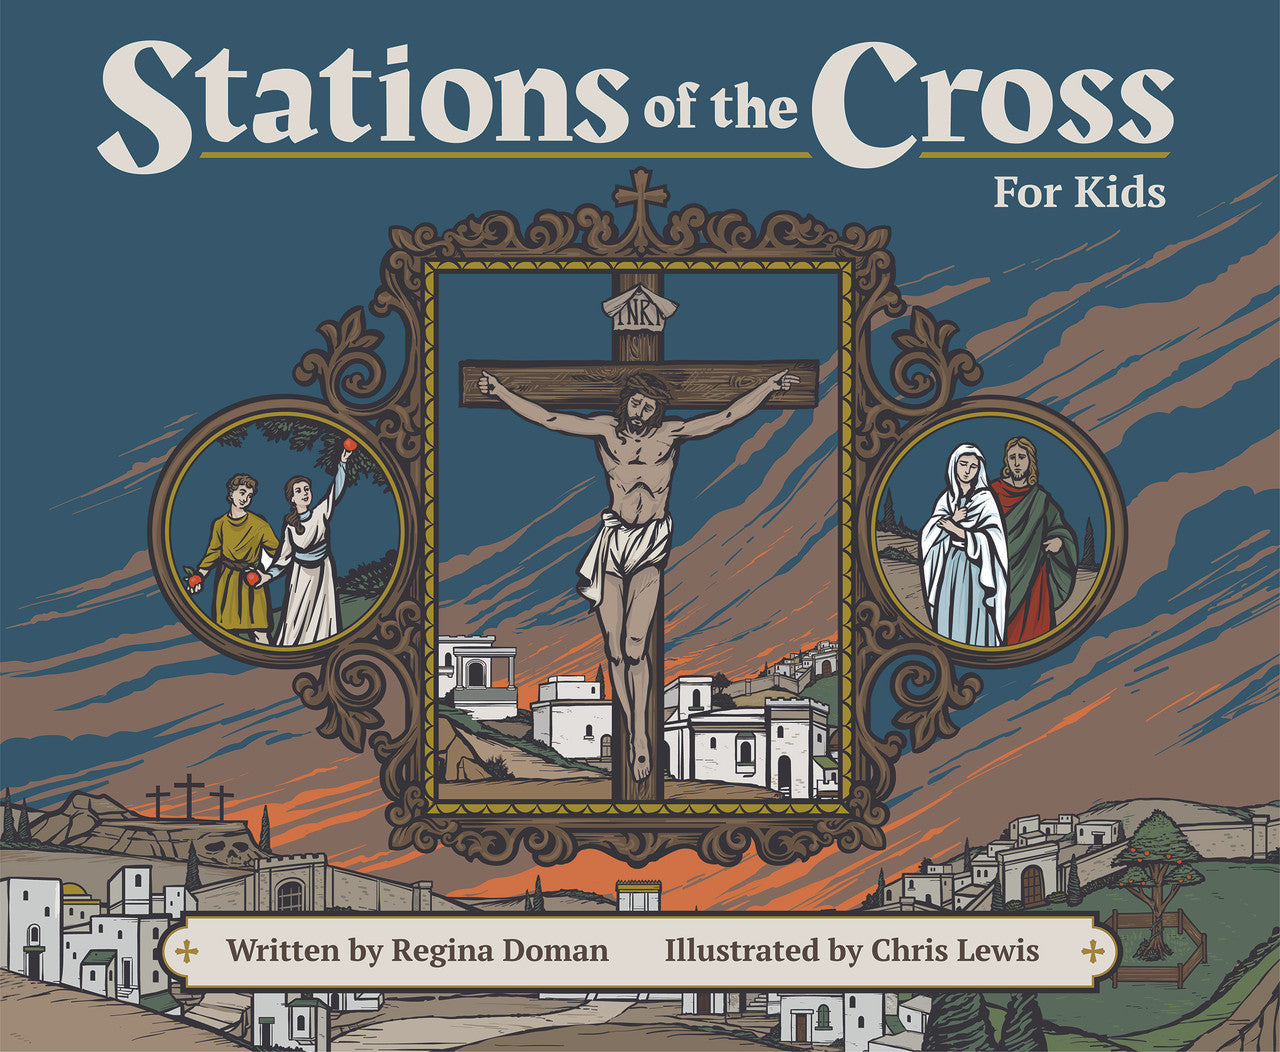 Stations of the Cross for Kids